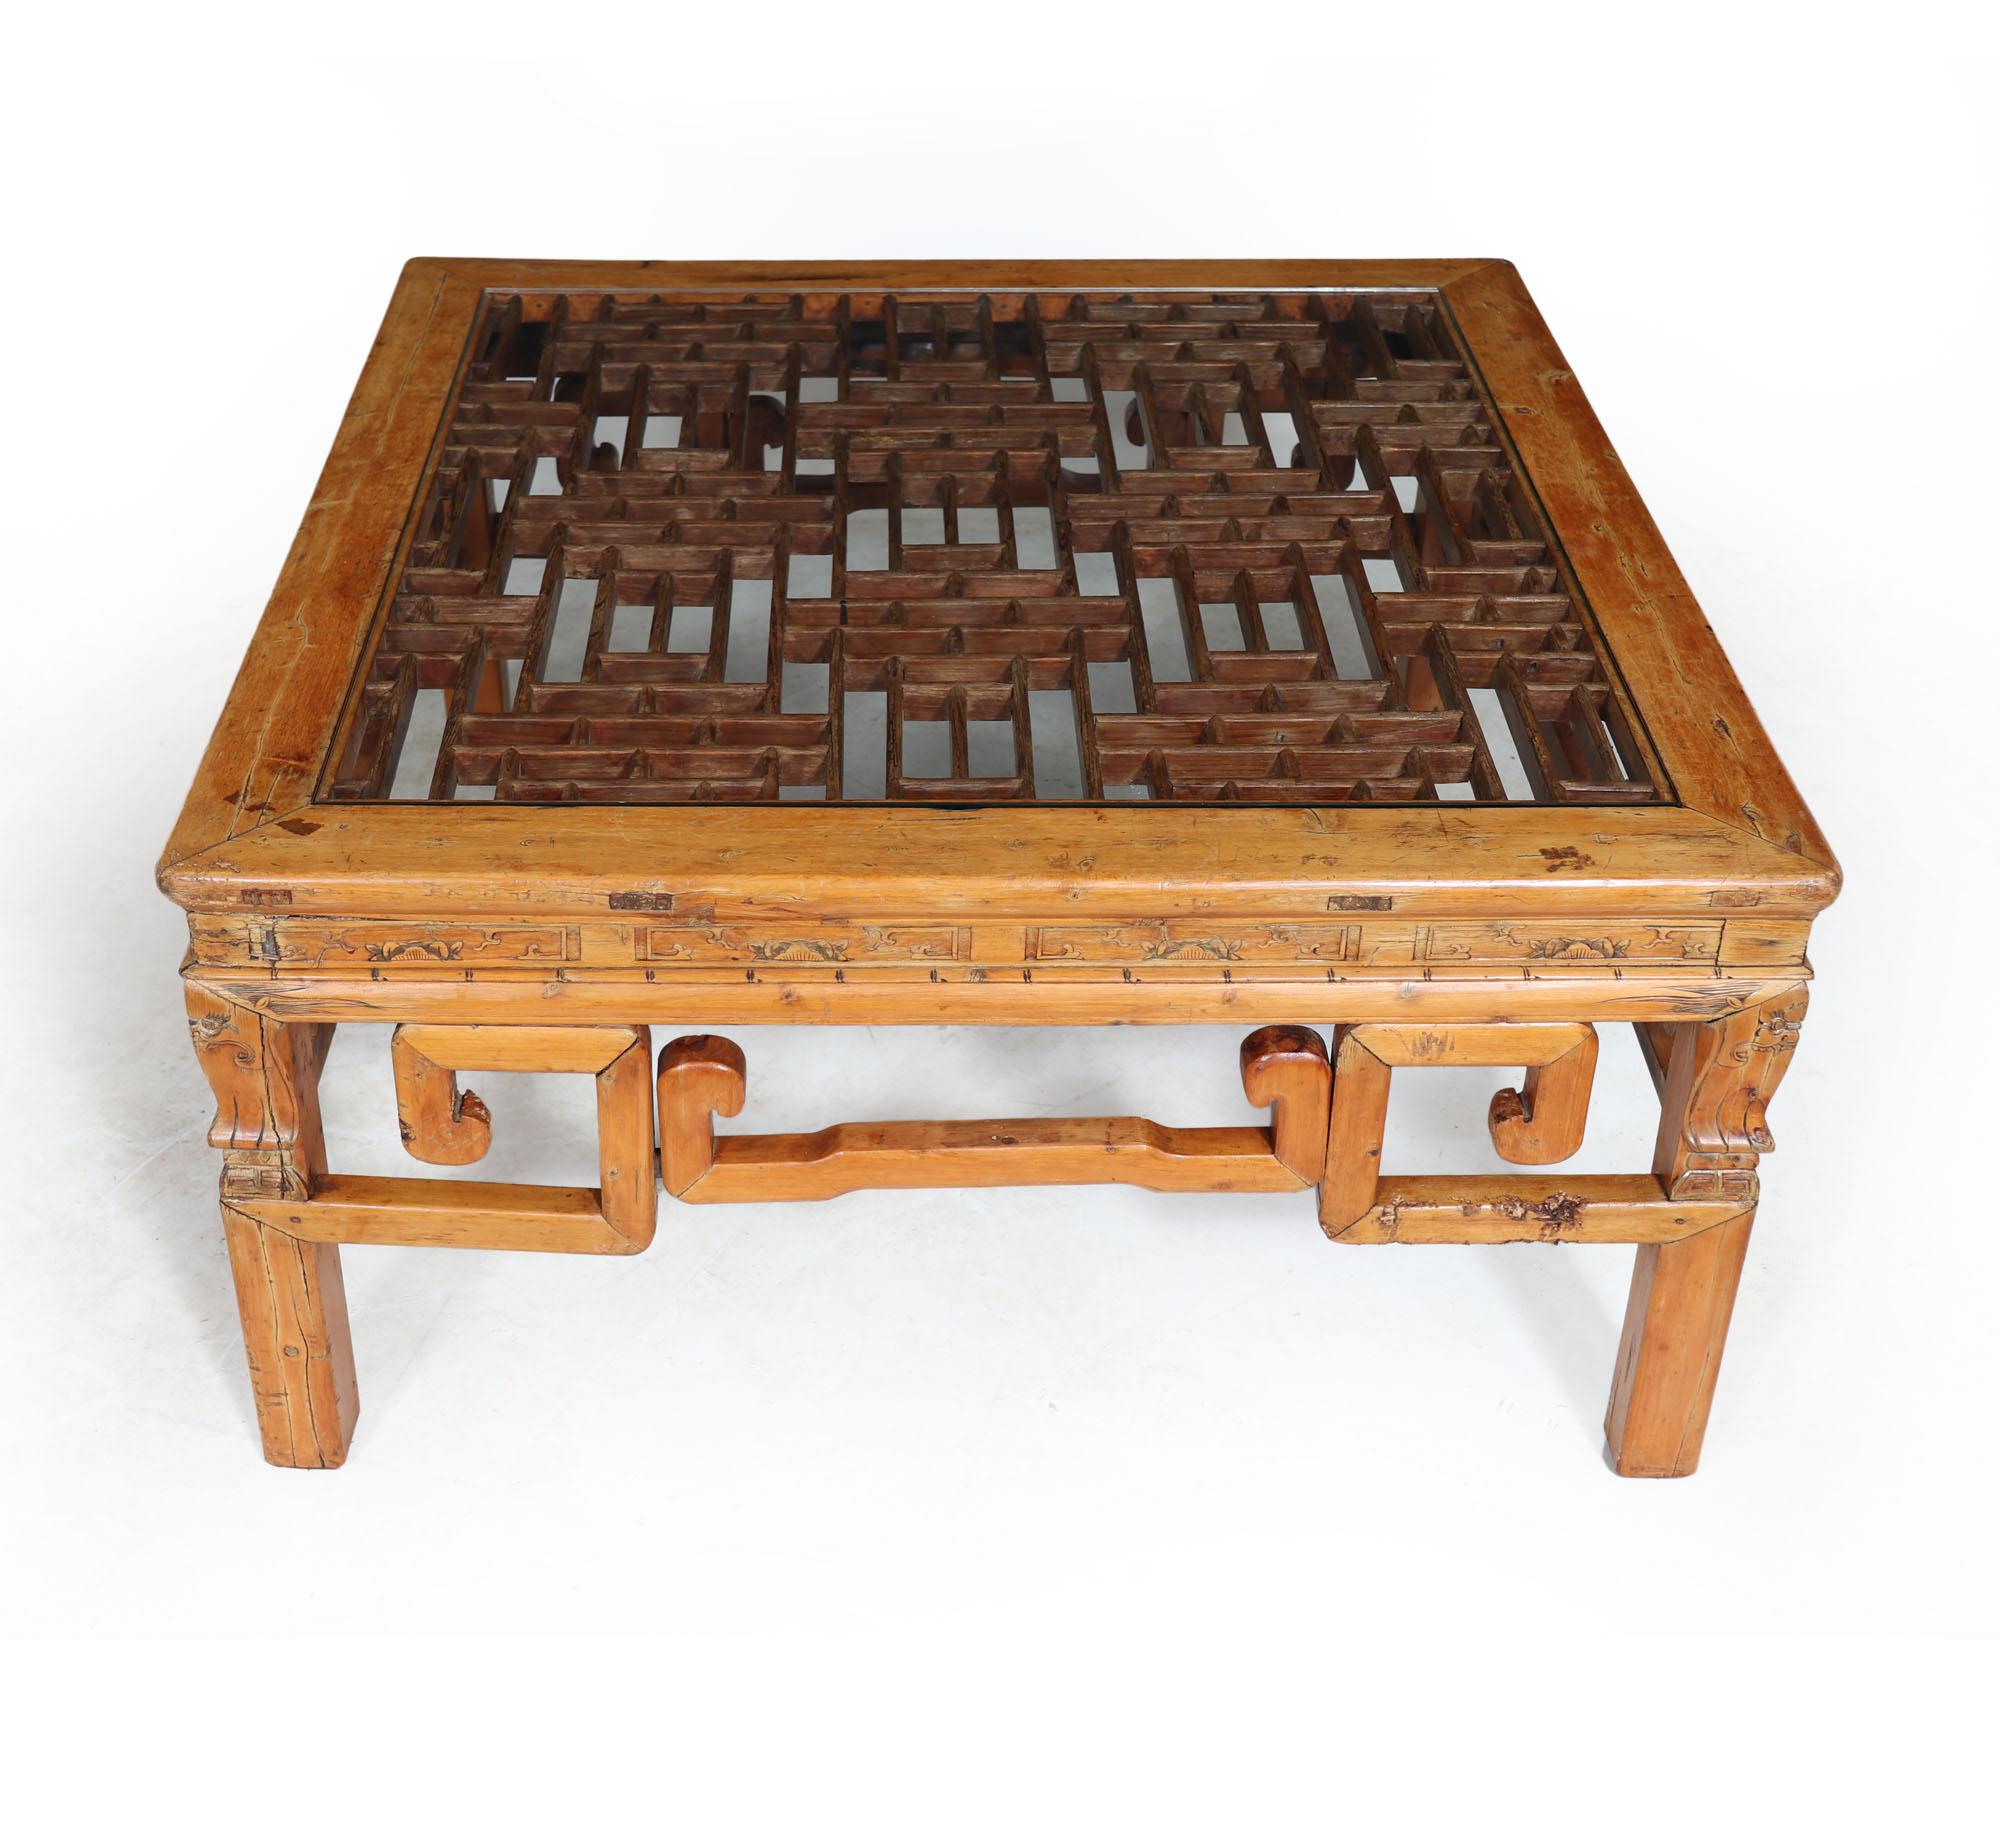 Antique Chinese Lattice Work Coffee Table In Good Condition For Sale In Paddock Wood Tonbridge, GB